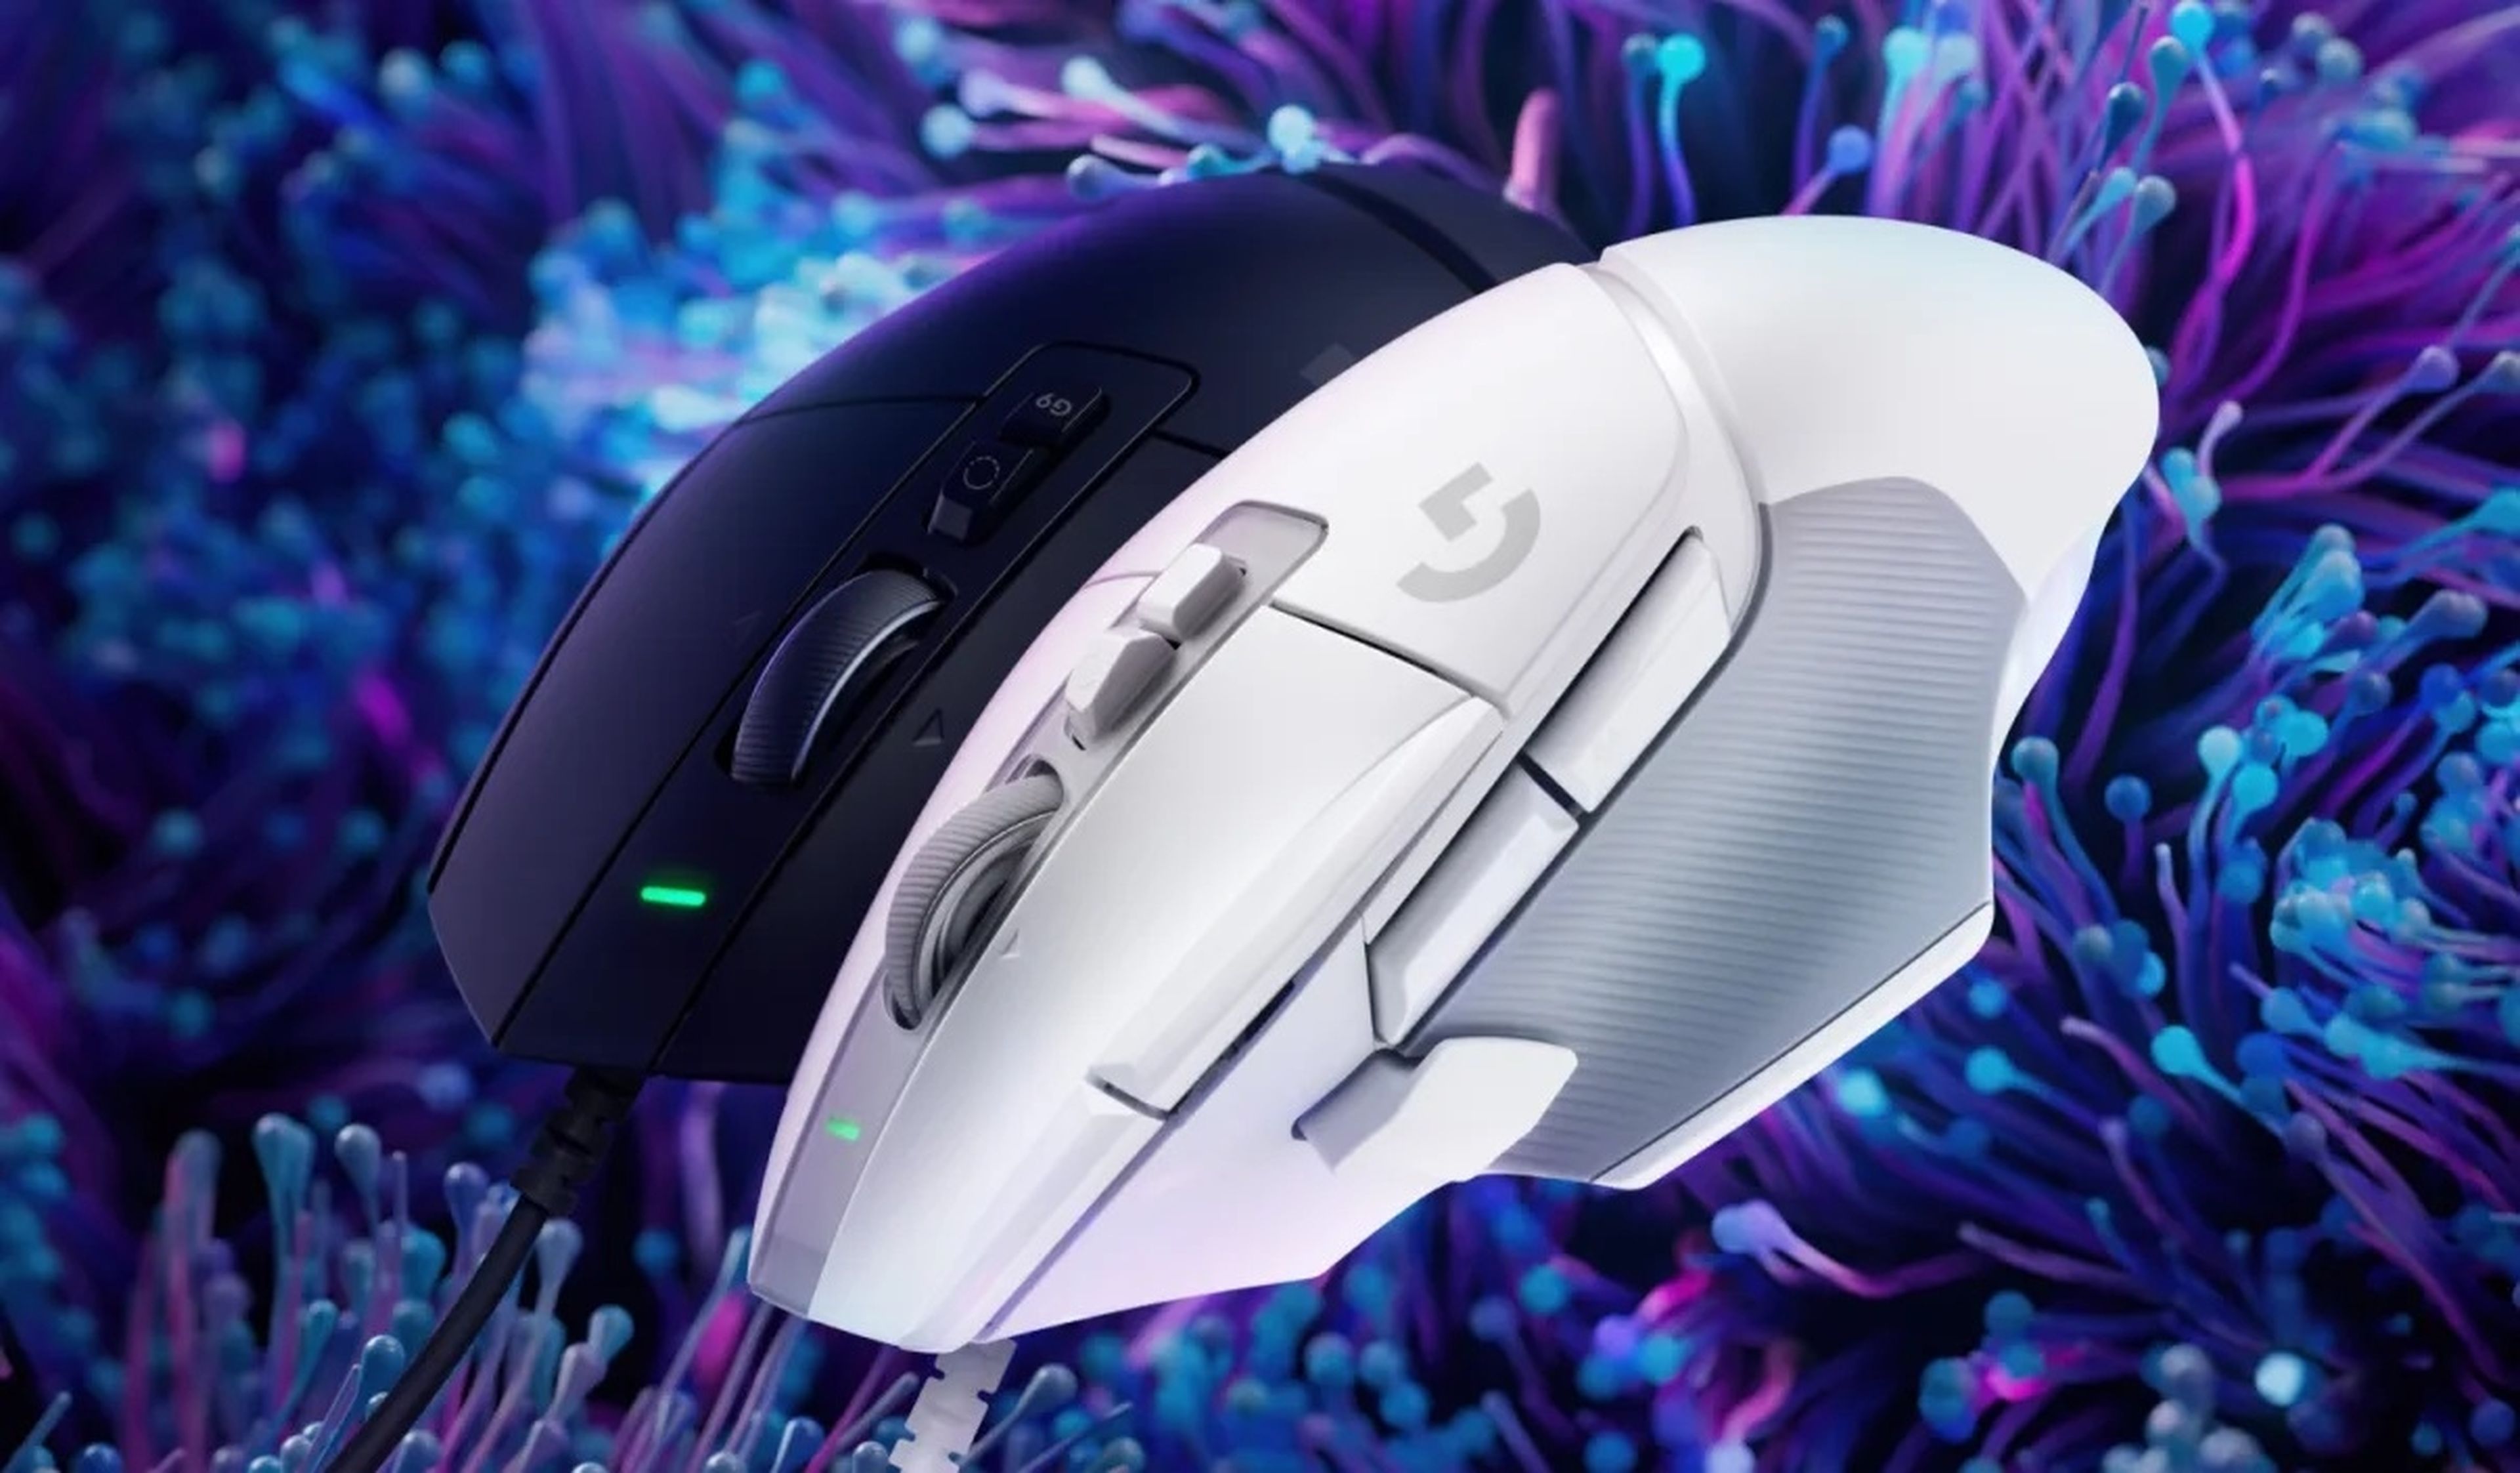 This is the new Logitech G502 X mice, the successors of the mythical gaming range, with important innovations